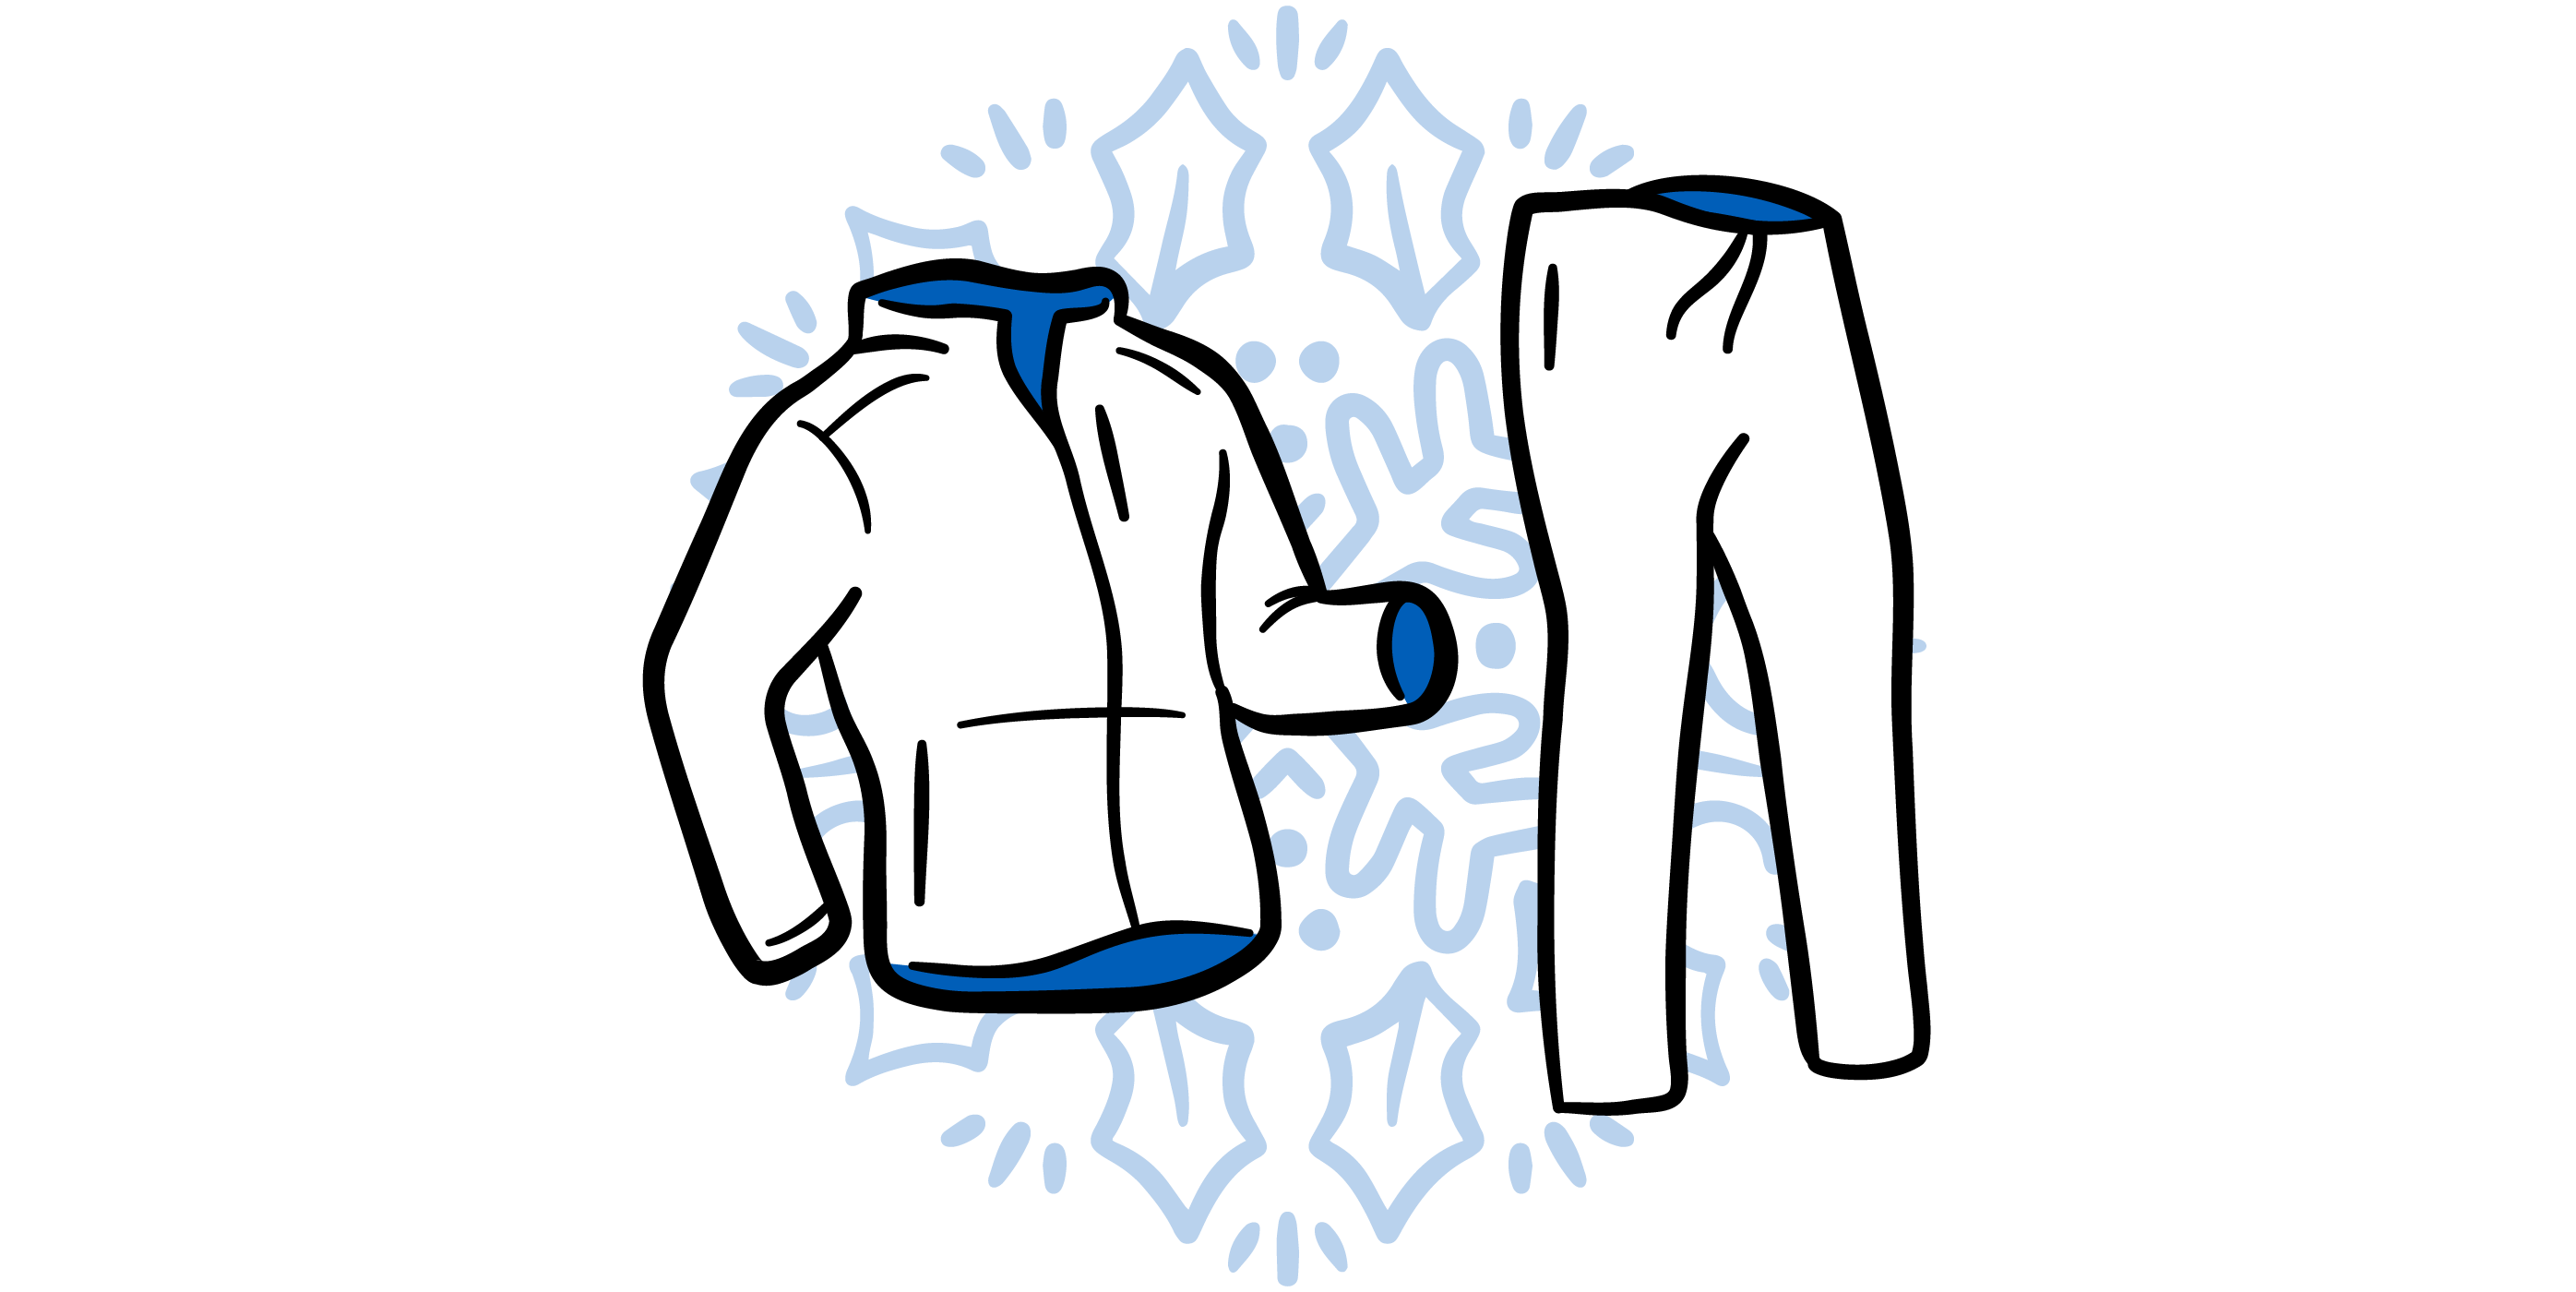 Illustrated jacket and pants